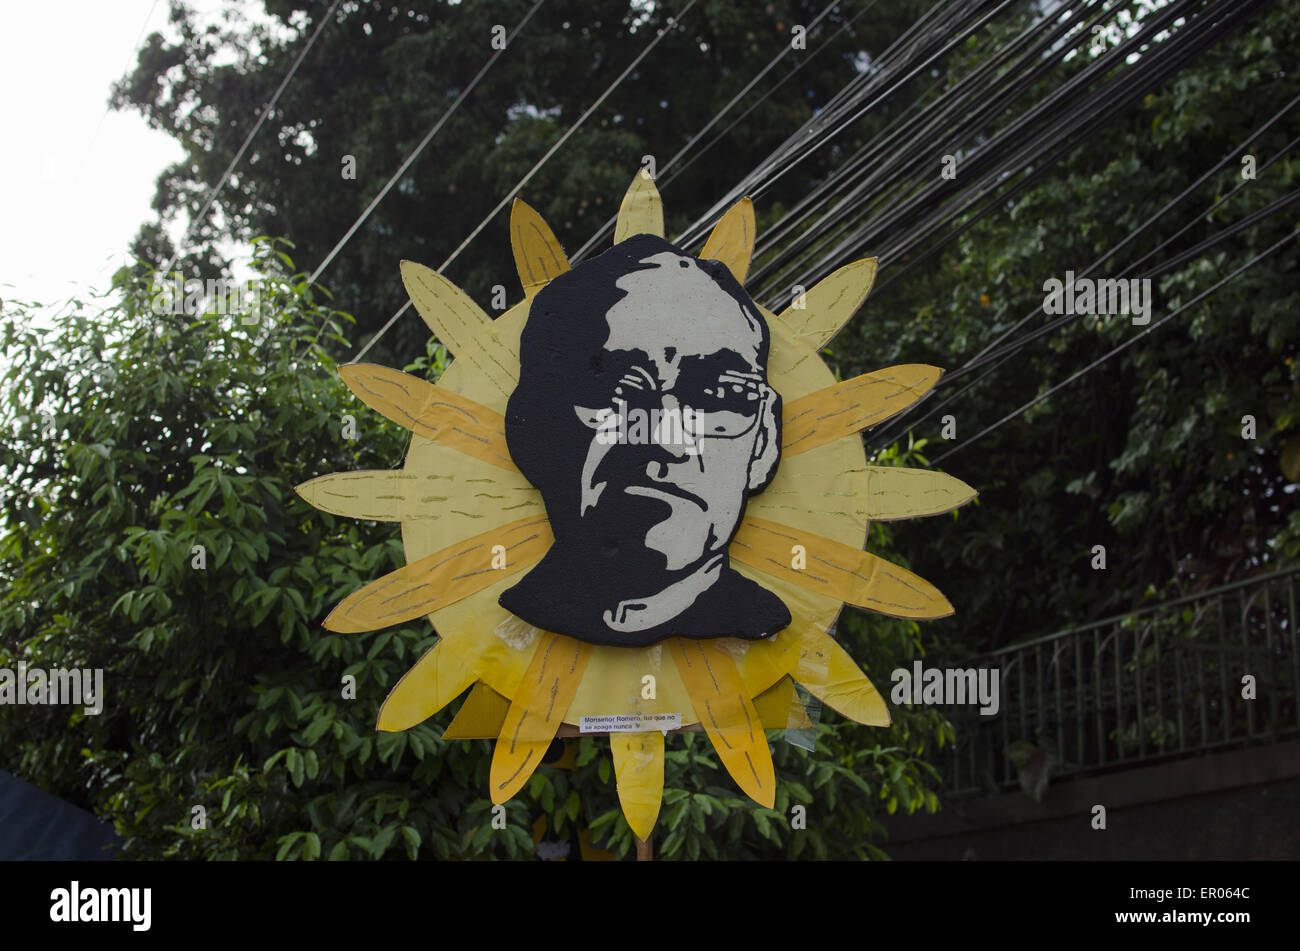 San Salvador, San Salvador, El Salvador. 23rd May, 2015. A sign made in the shape of a sun and bearing the likeness of Oscar Arnulfo Romero reads ''MonseÃ±or Romero, the light that will never go out.'' March 23 marked the beatification of the prelate, assassinated in 1980 while saying mass. © ZUMA Wire/ZUMAPRESS.com/Alamy Live News Stock Photo